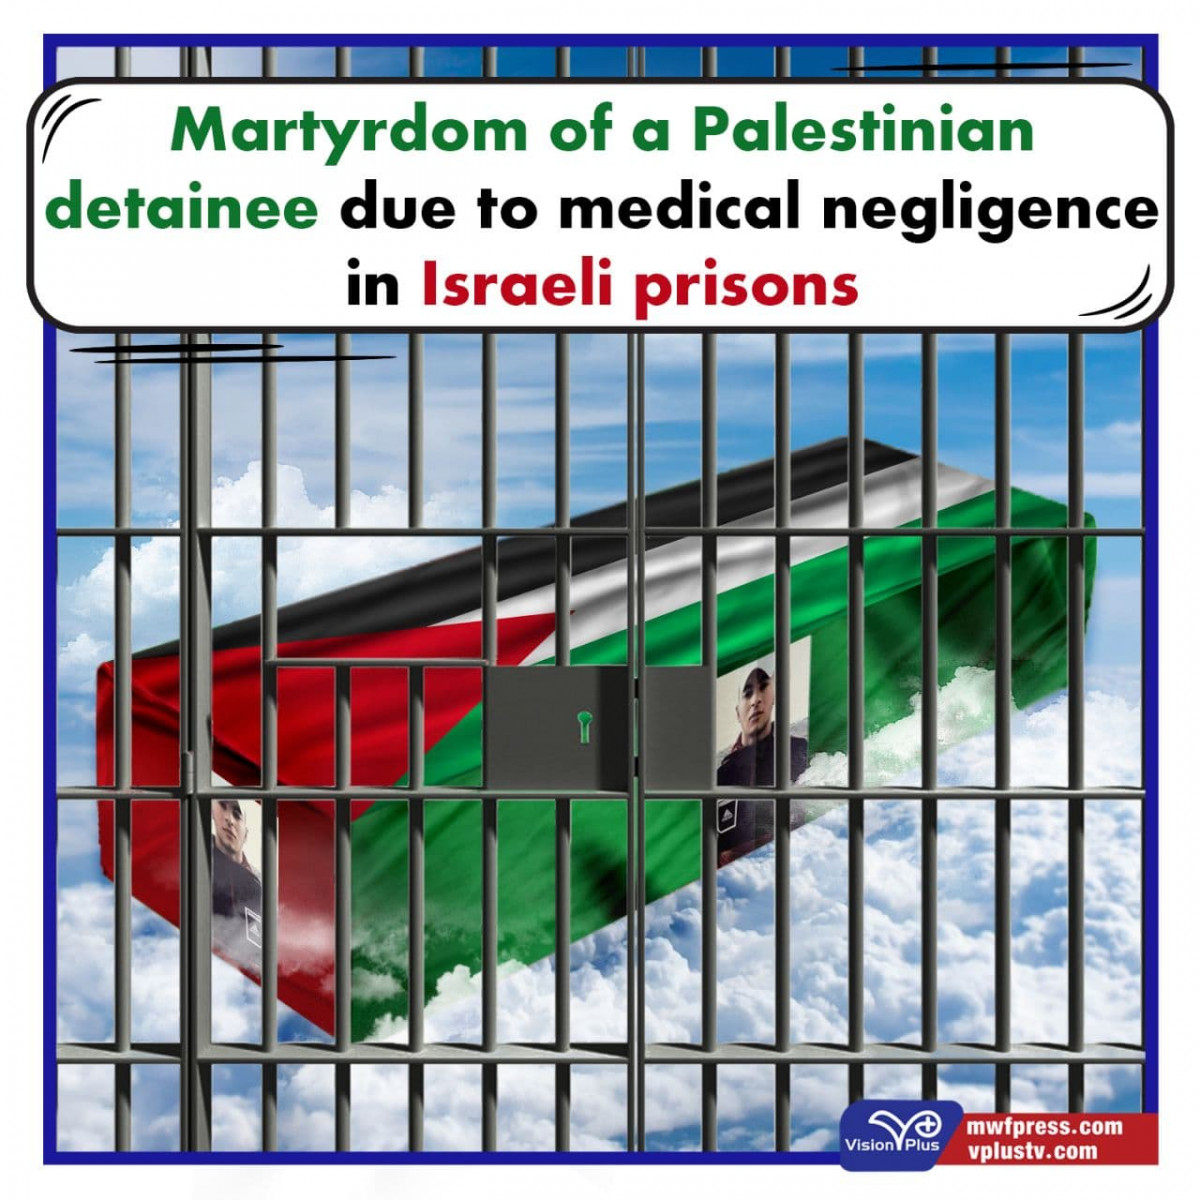 Martyrdom of a Palestinian detainee due to medical negligence in Israeli prisons